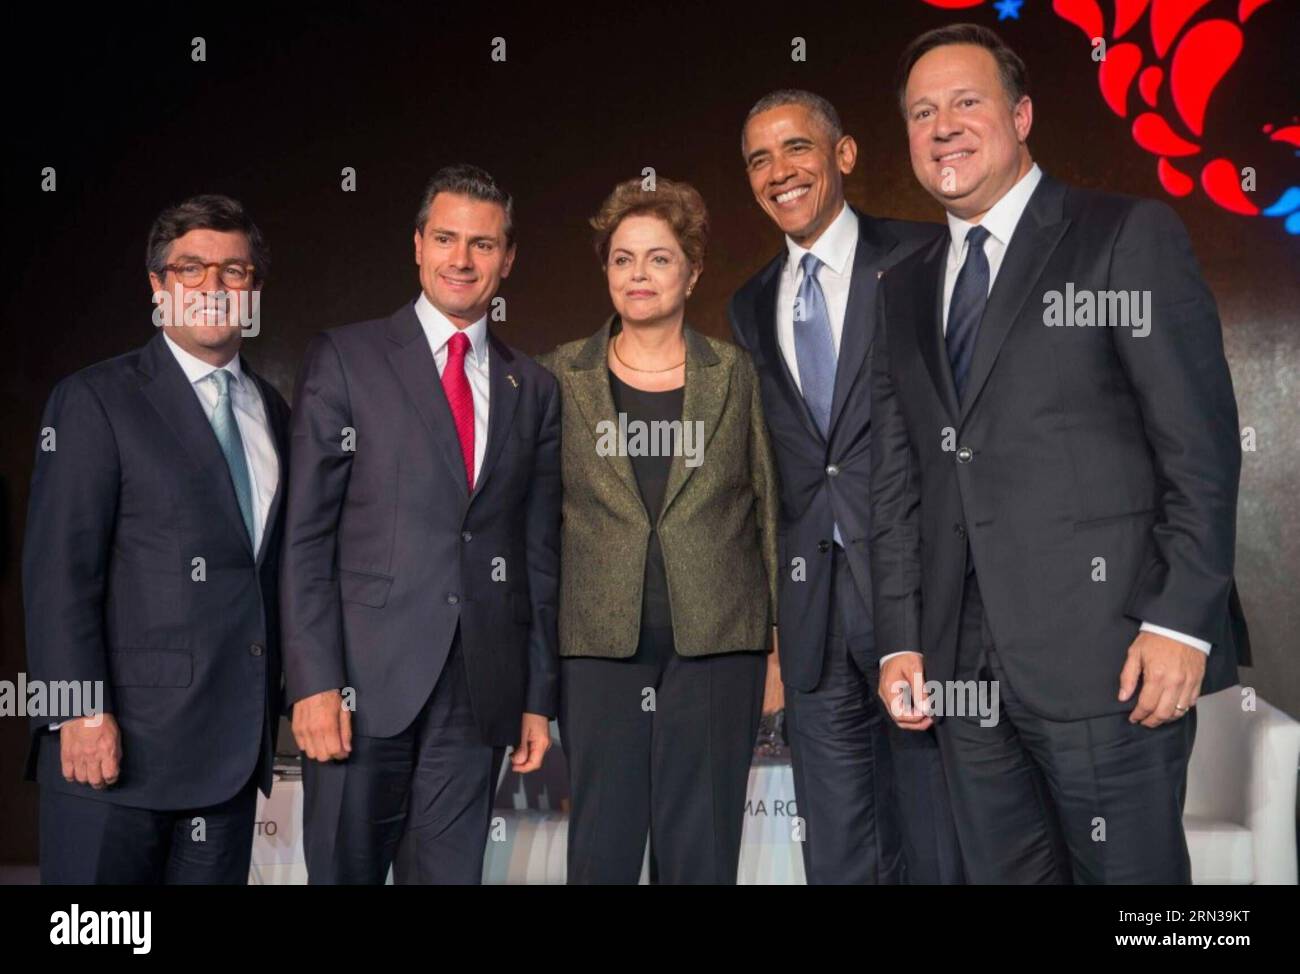 (150411) -- PANAMA CITY, April 11, 2015 -- (From L to R) Image provided by Mexico s Presidency shows Luis Alberto Moreno, president of the Inter-American Development Bank, Mexican President Enrique Pena Nieto, Brazilian President Dilma Rousseff, U.S. President Barack Obama and Panamanian President Juan Carlos Varela posing for photos during the Business Summit before the 7th Summit of the Americas, in Panama City, capital of Panama, on April 10, 2015. Mexico s Presidency) (da) PANAMA-PANAMA CITY-AMERICAN SUMMIT-BUSINESS MEETING MEXICANxPRESIDENCY PUBLICATIONxNOTxINxCHN   Panama City April 11 2 Stock Photo